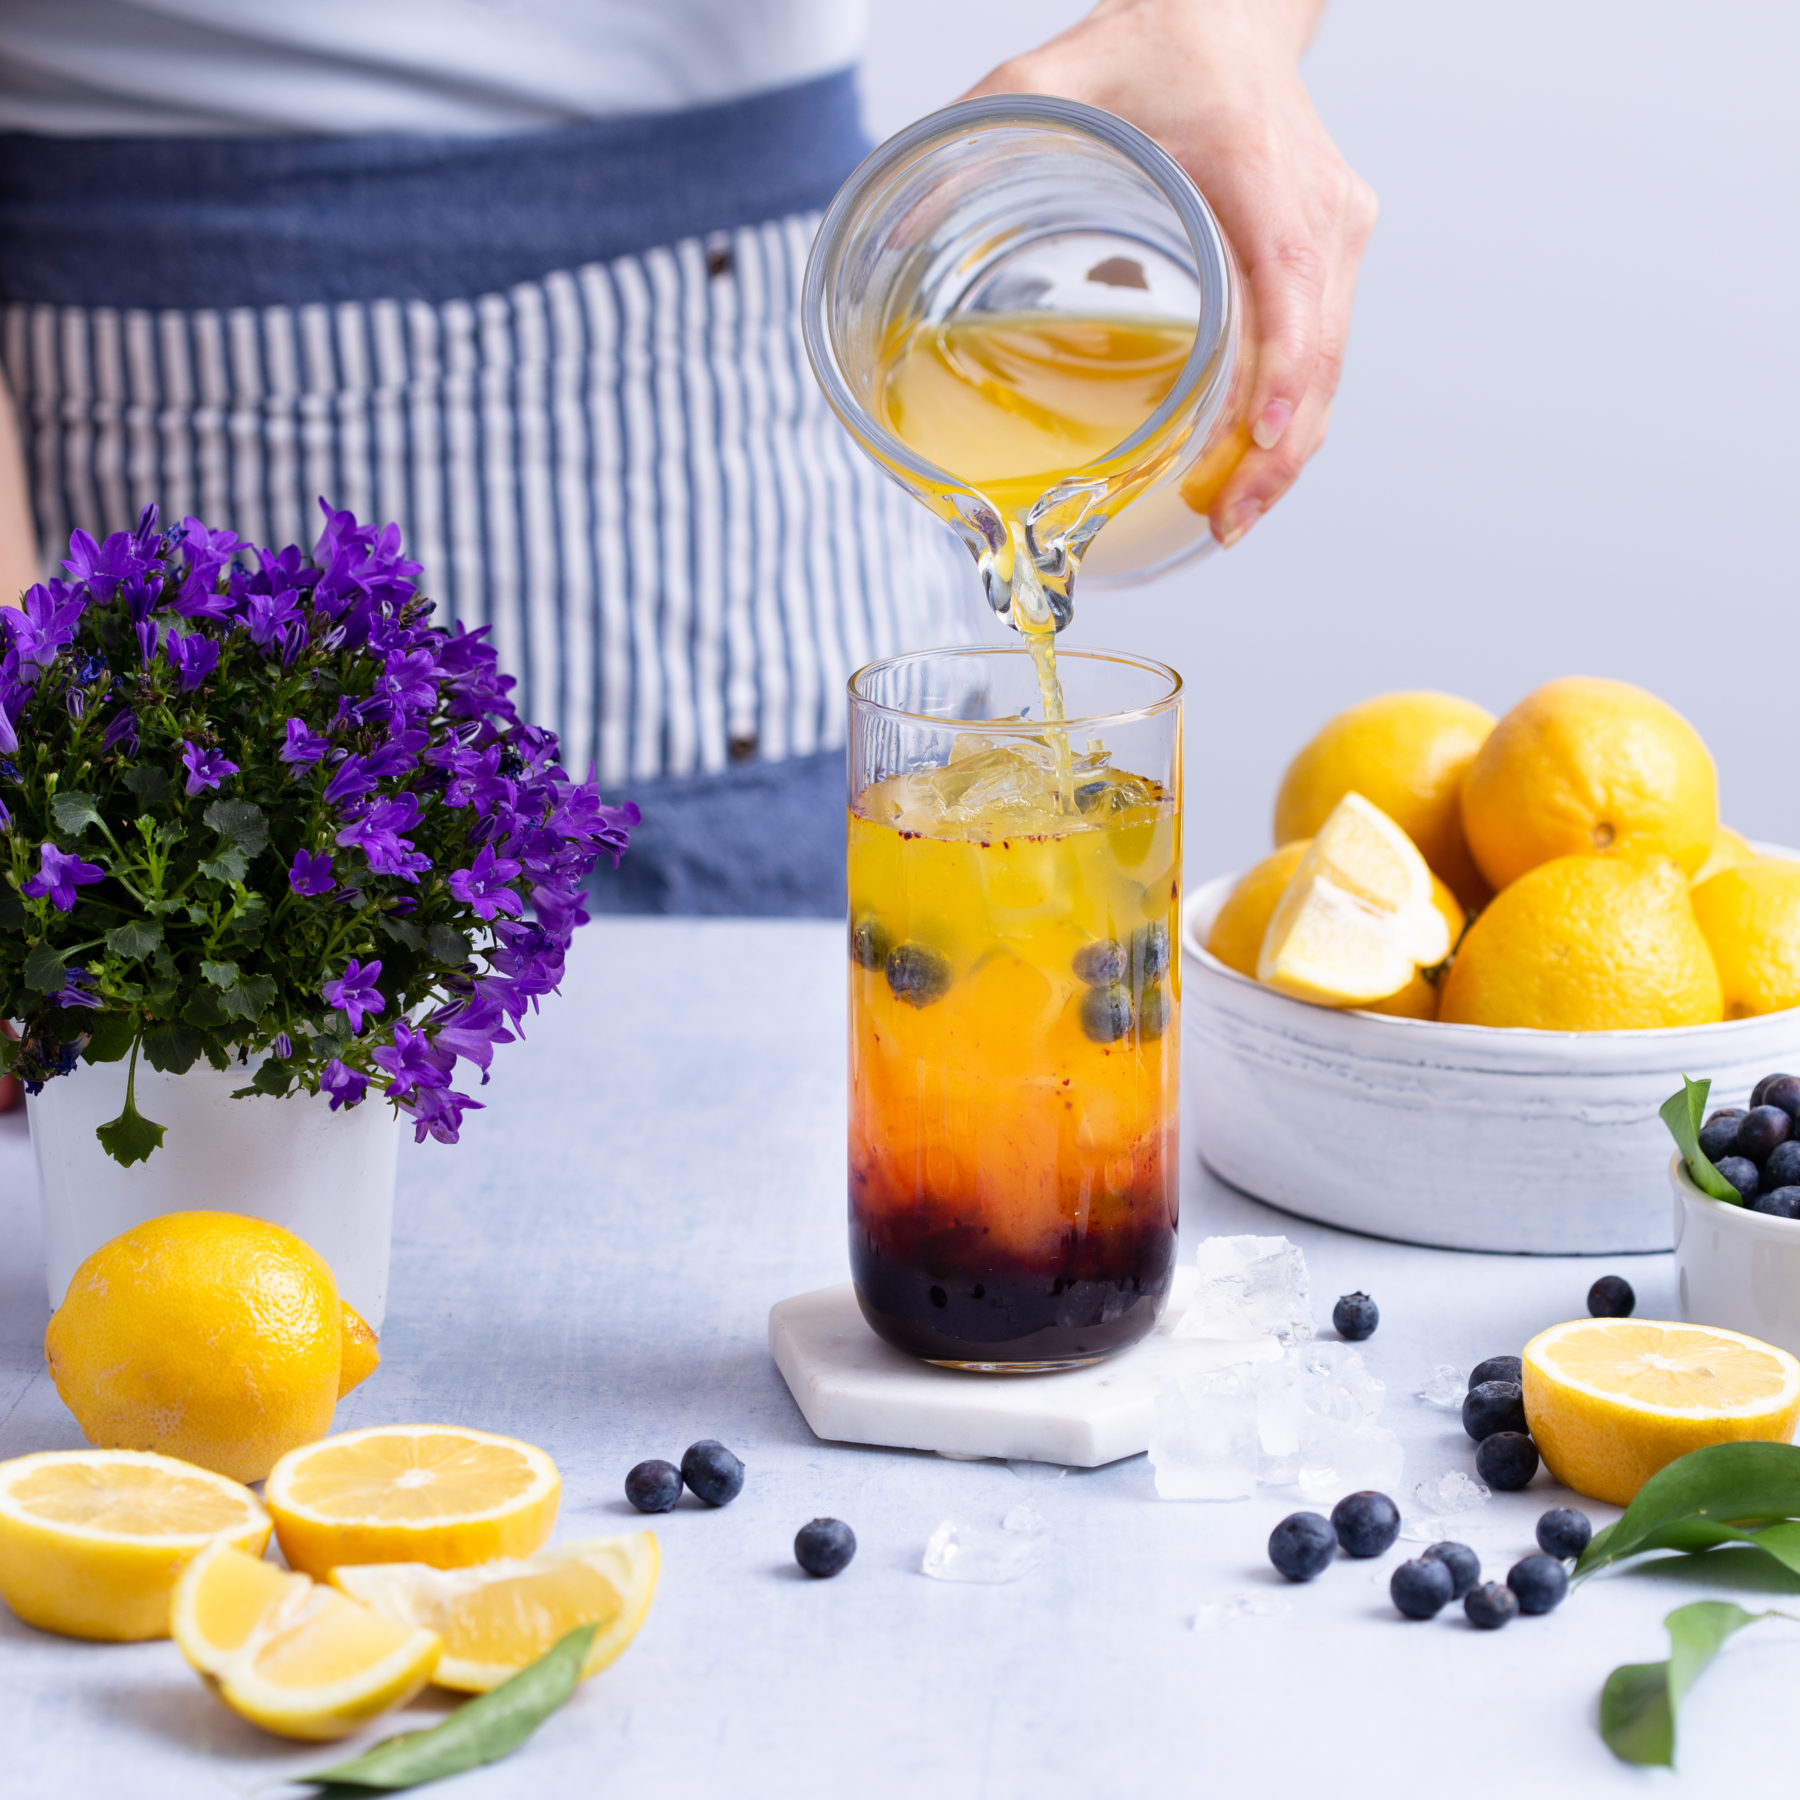 Pouring a glass of blueberry lavender turmeric lemonade over ice from a pitcher onto a white marble table with purple flowers, a bowl of fresh lemons and blueberries scattered.